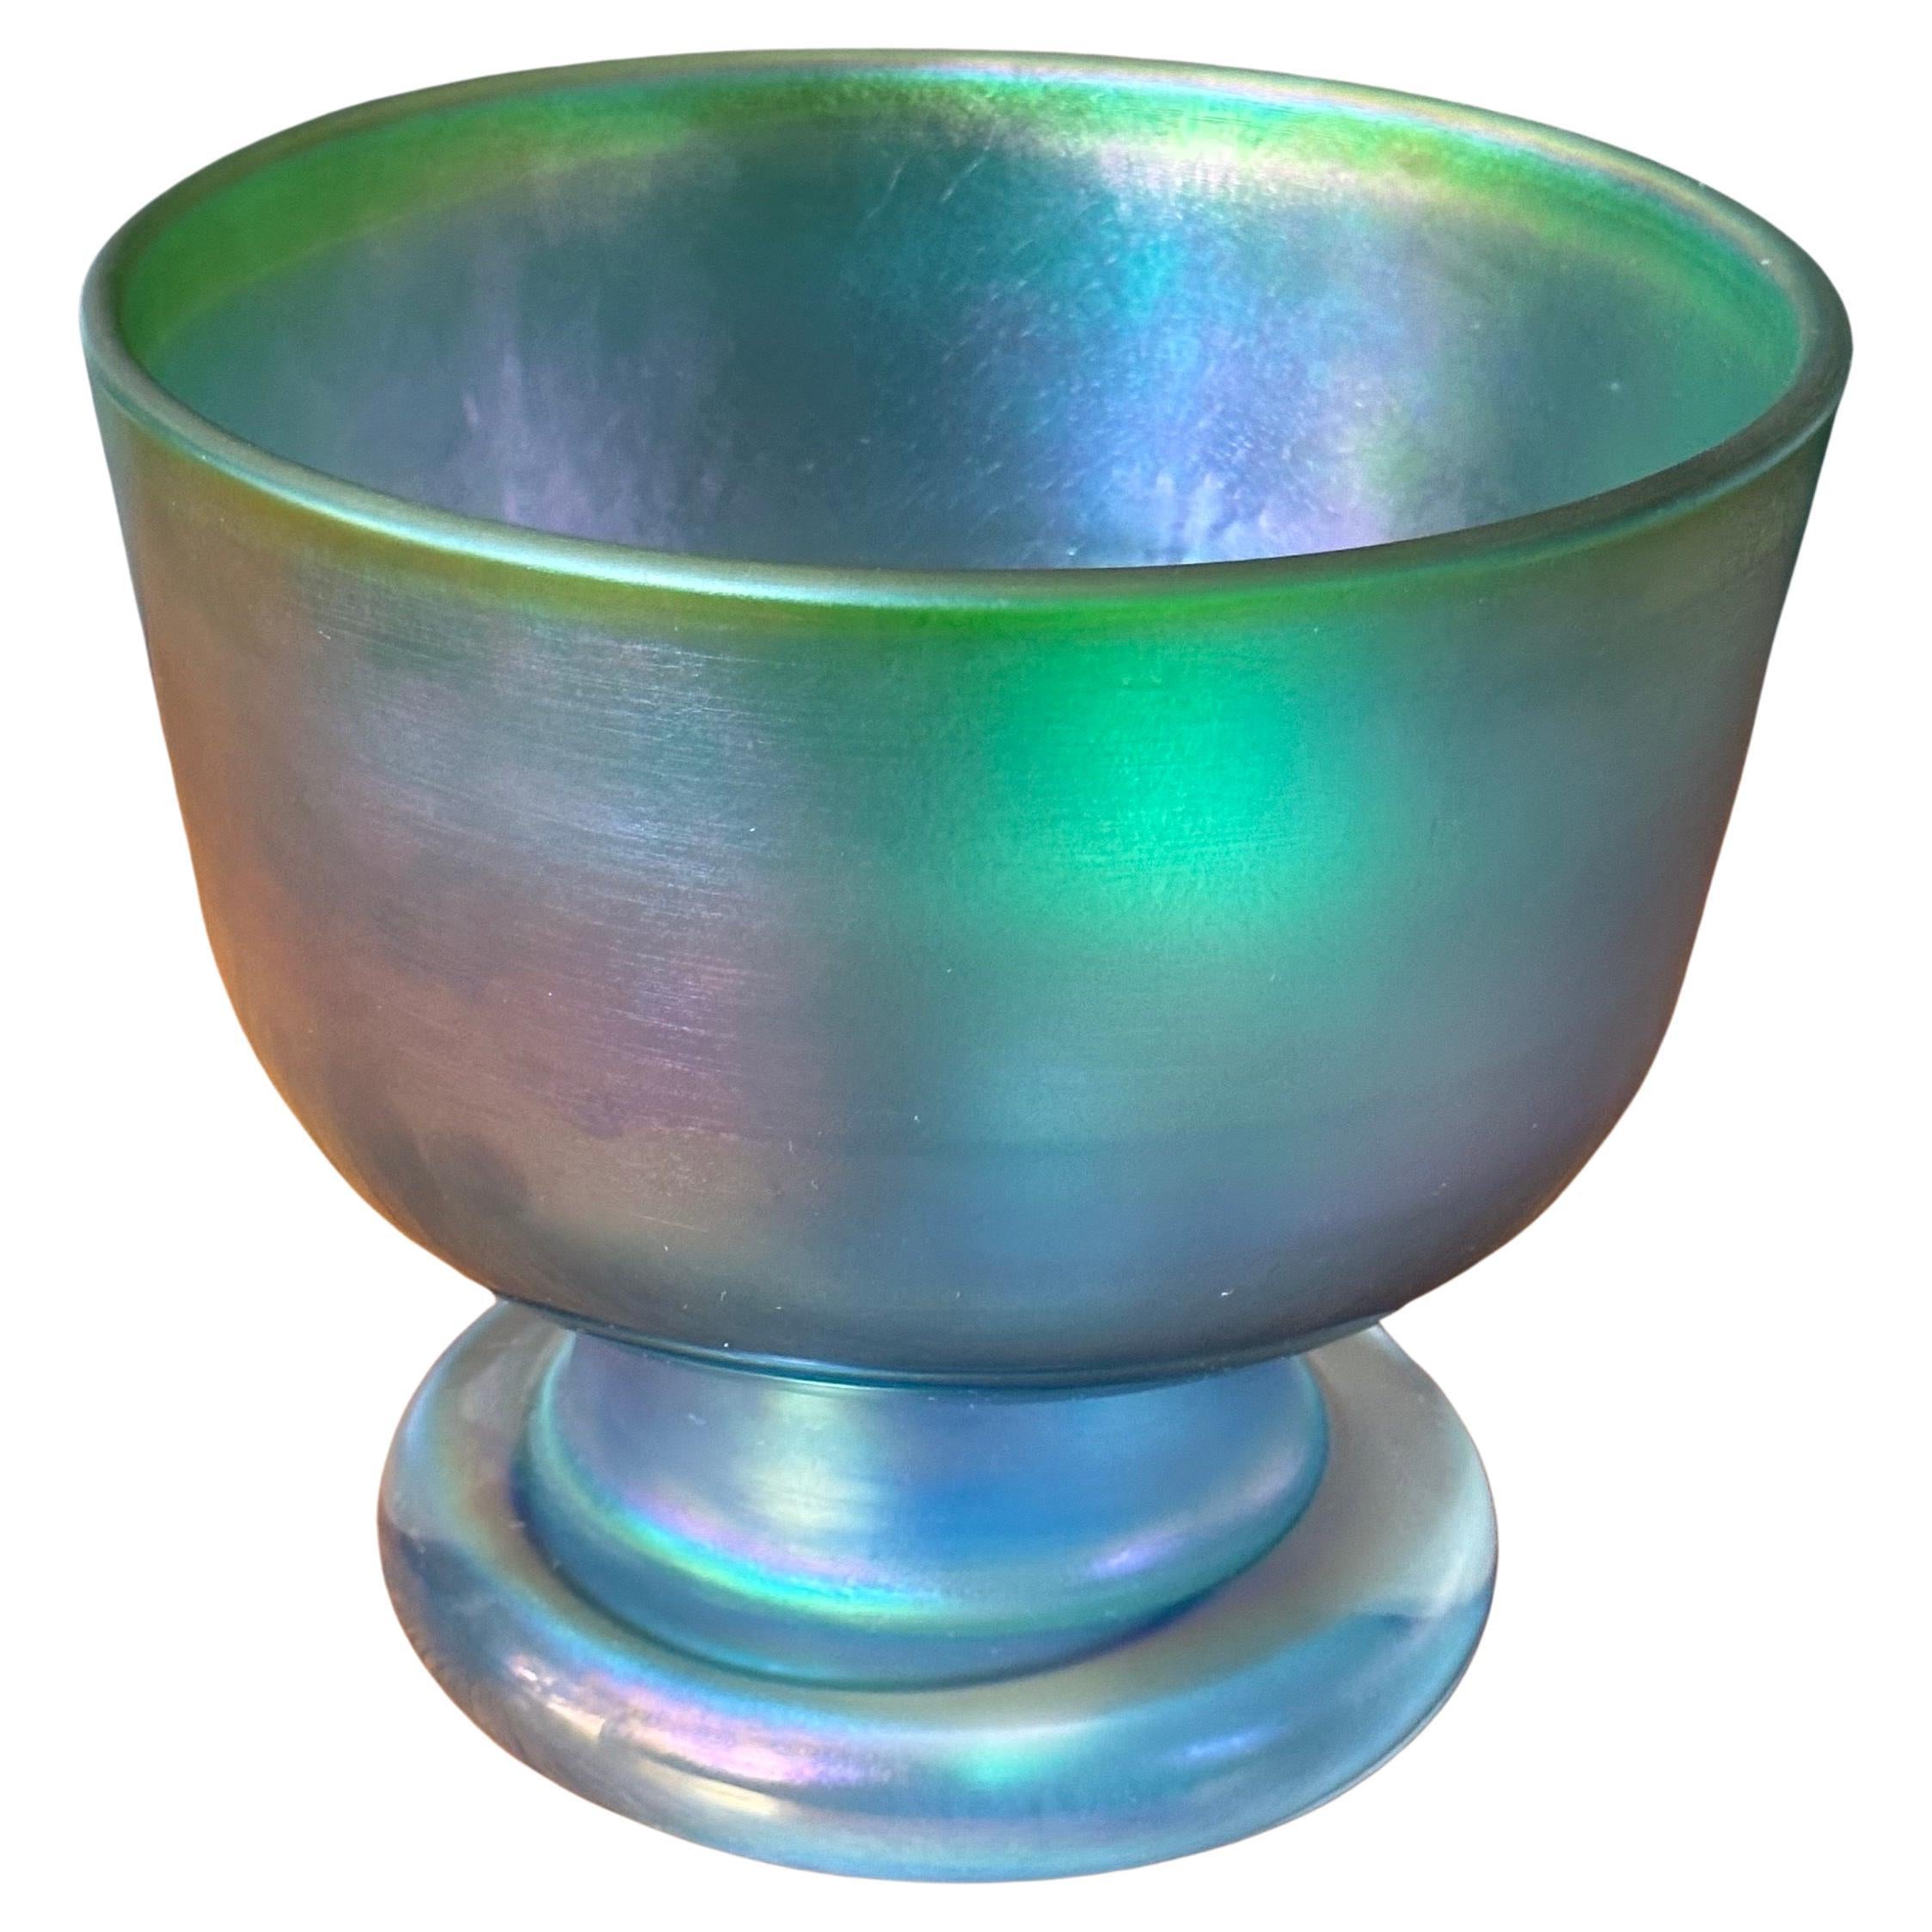 Stunning iridescent footed art glass vase / bowl by Bertil Vallien for Boda Abfors, circa 1980s.  The bowl is in very good vintage condition and measures 8